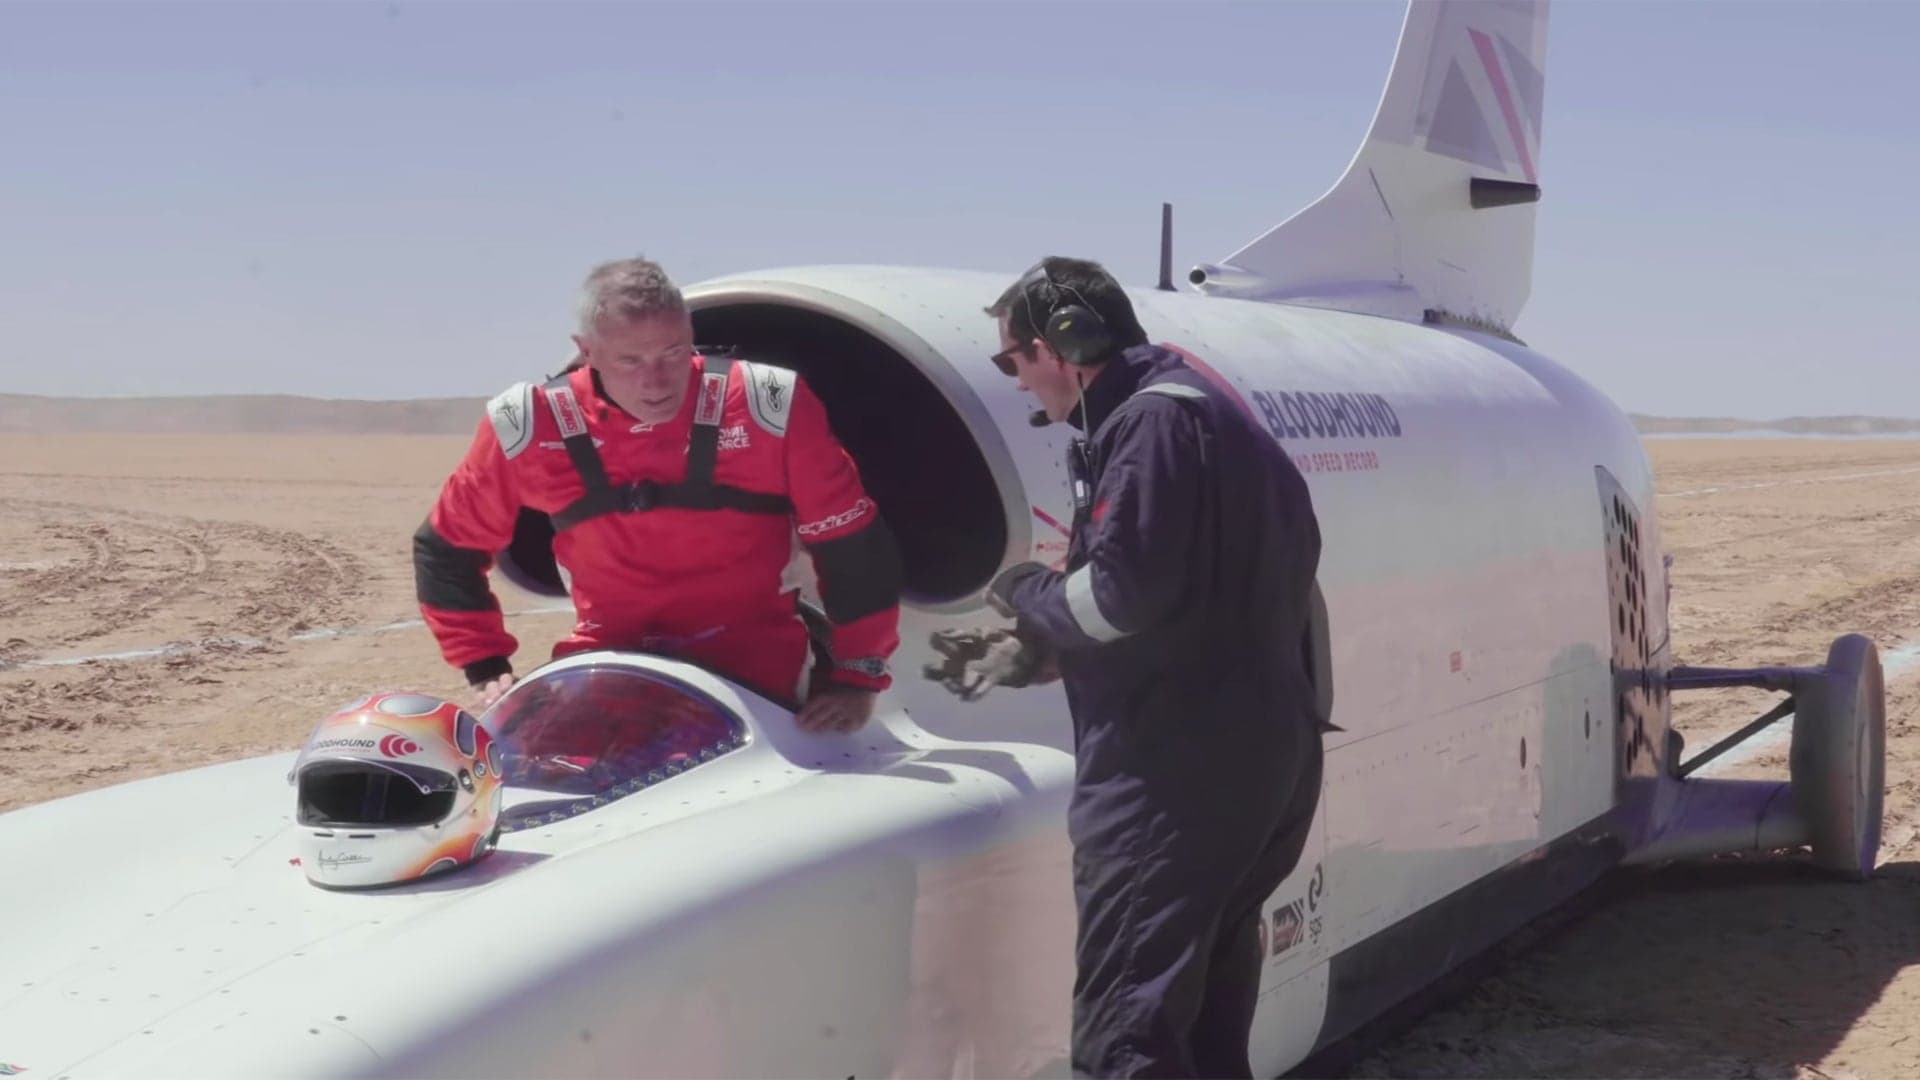 Bloodhound Land Speed Record Car Blasts to 334 MPH in 13 Seconds